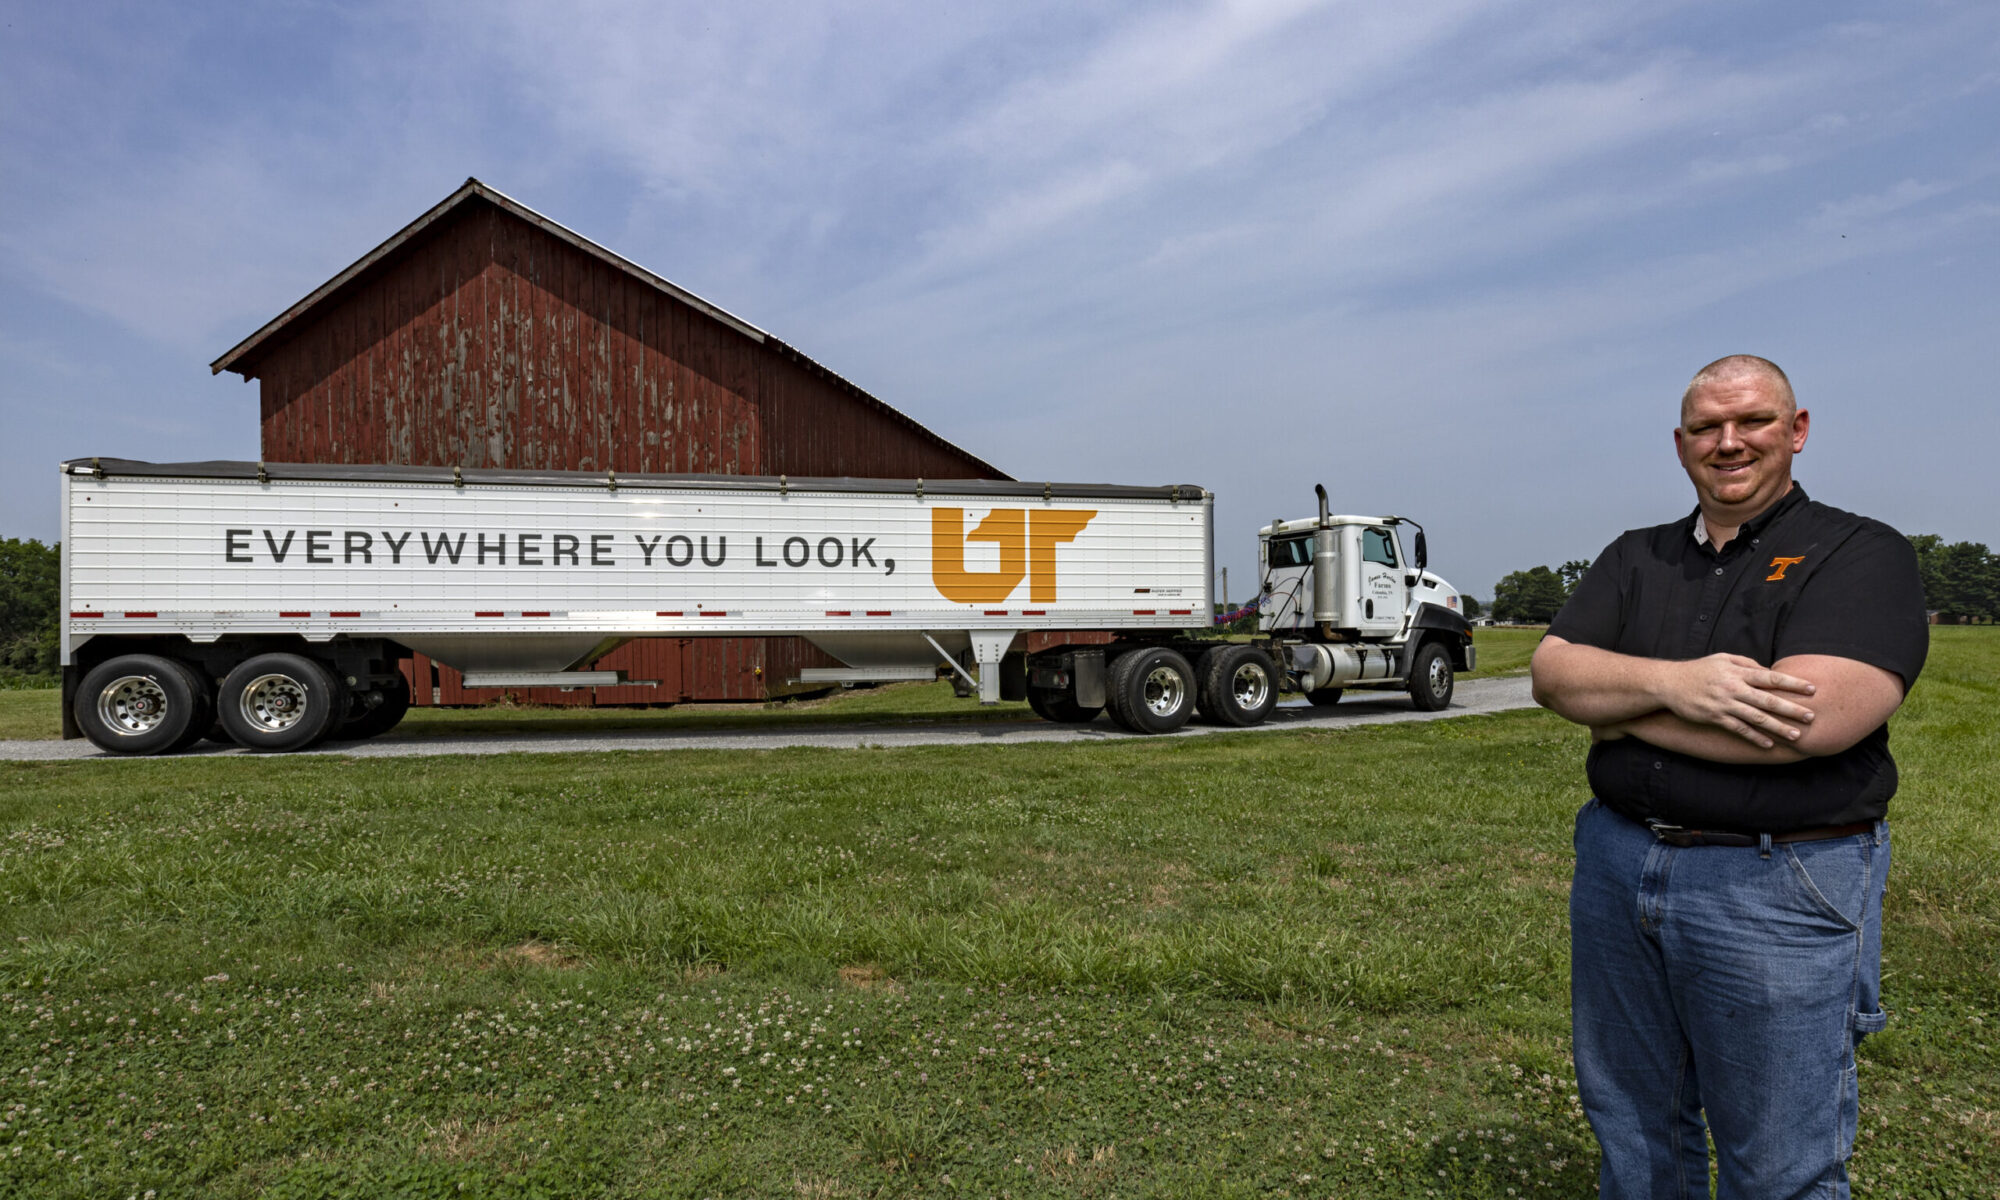 James Harlan standing in front of a grain trailer painted with "Everywhere You Look, UT"